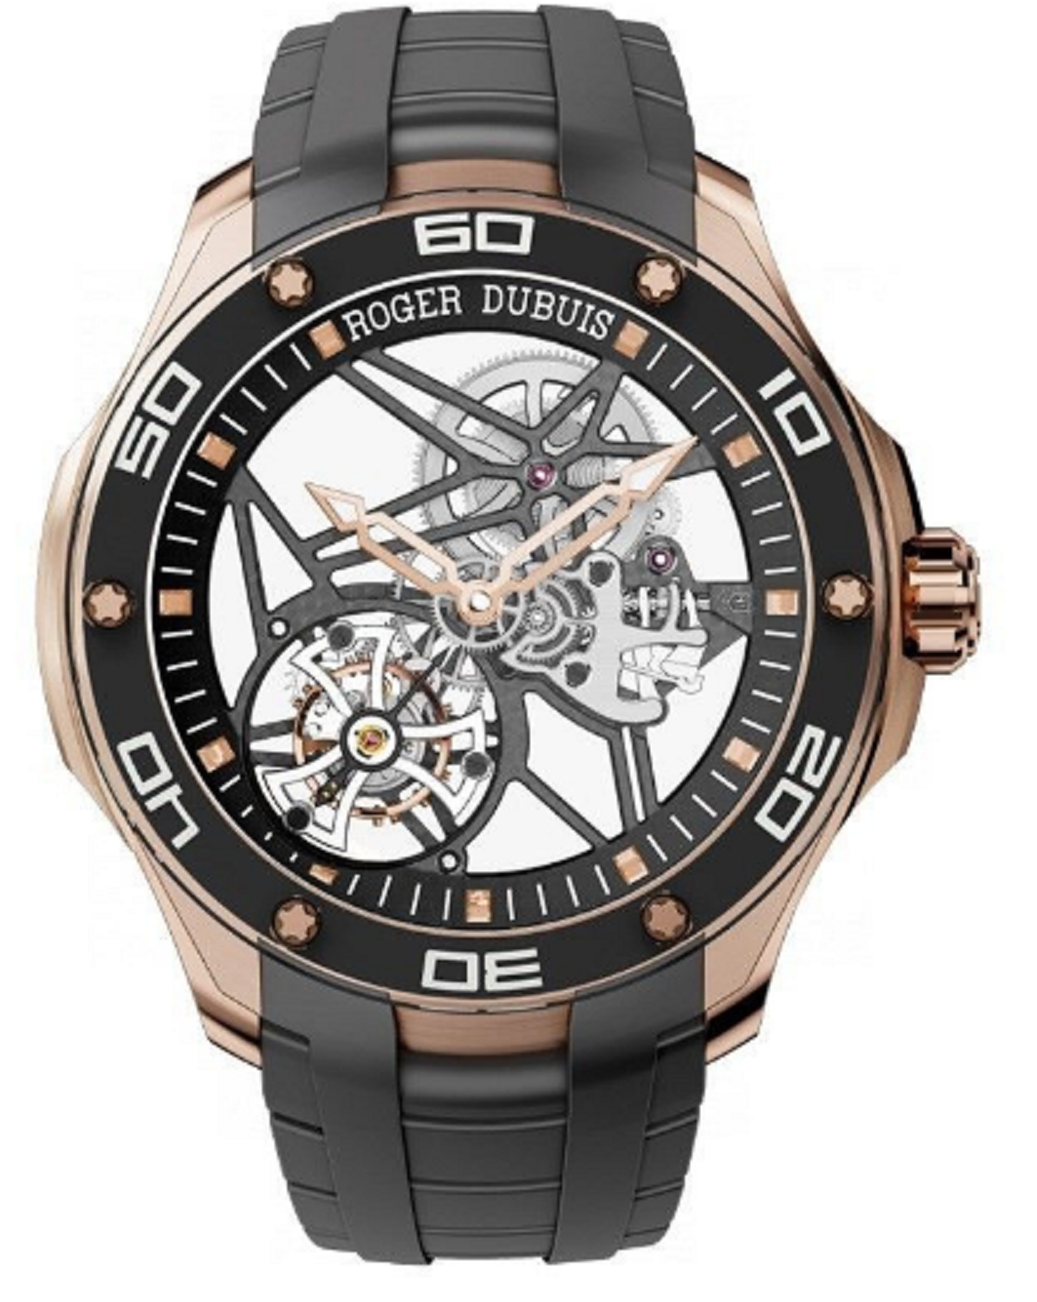 Replica Roger Dubuis Pulsion Skeleton Watches